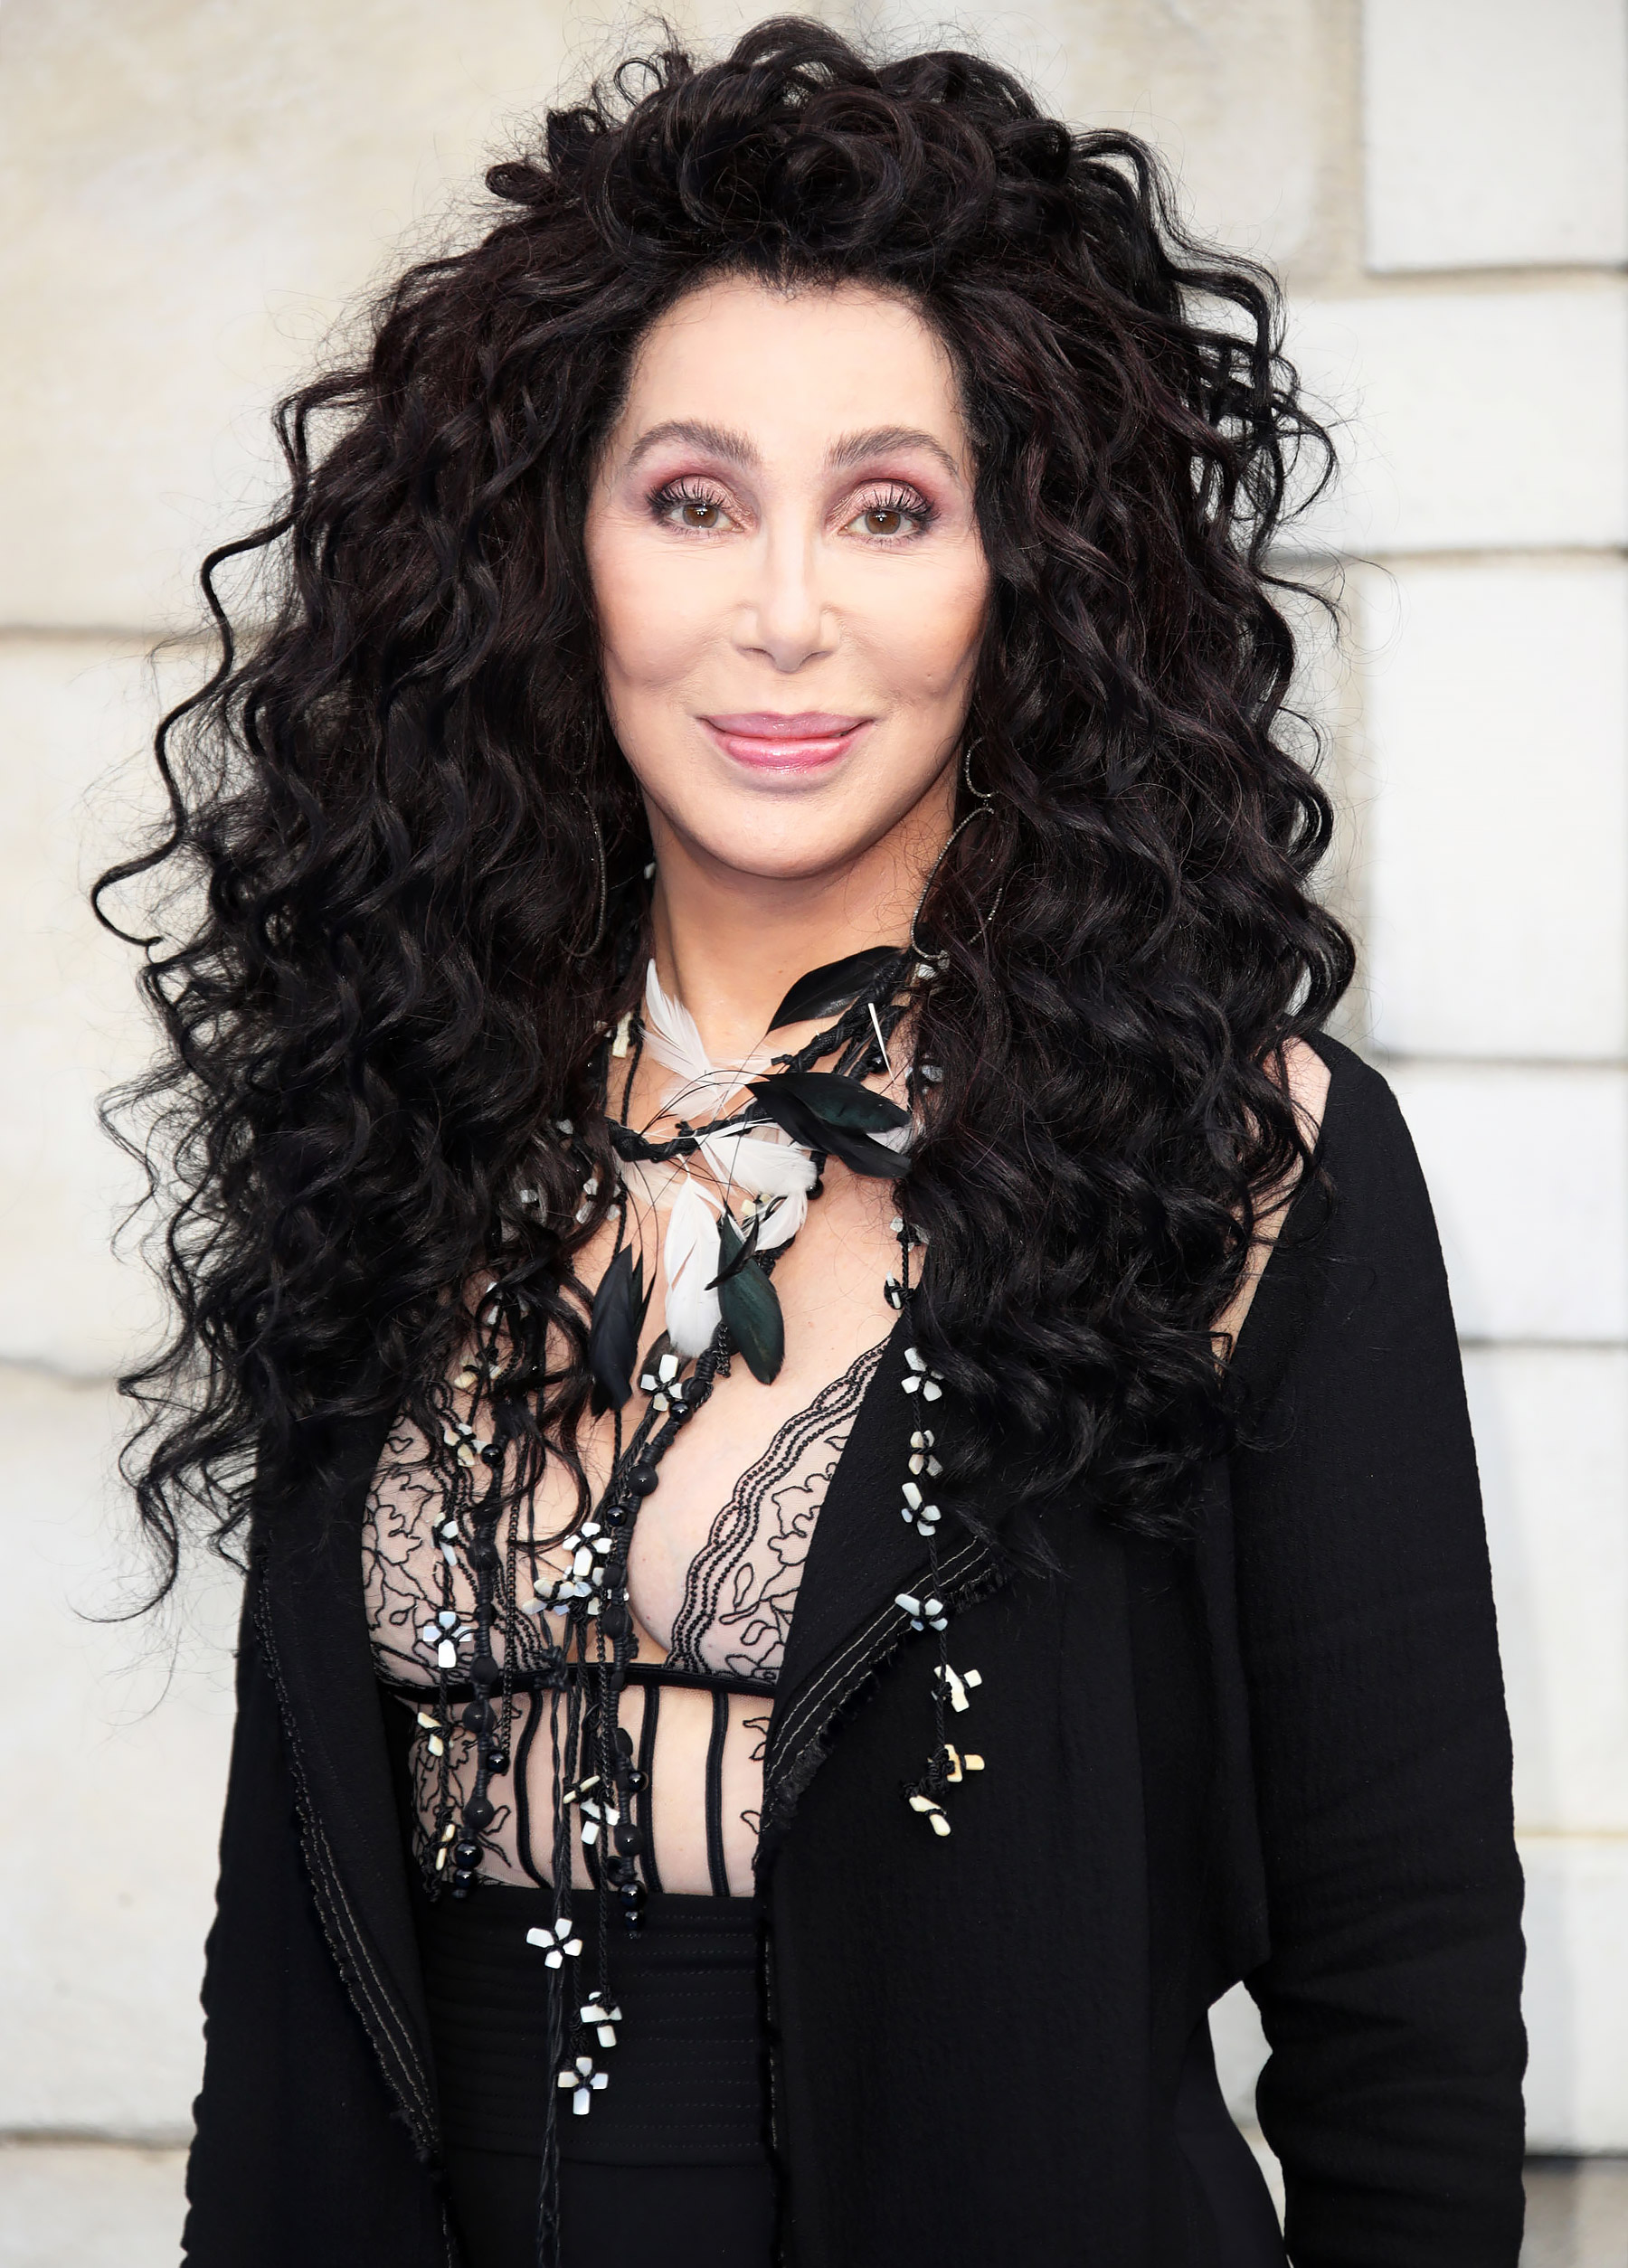 Iconic Singer Cher, 72, Revealed The Secret To Her Ageless Appearance